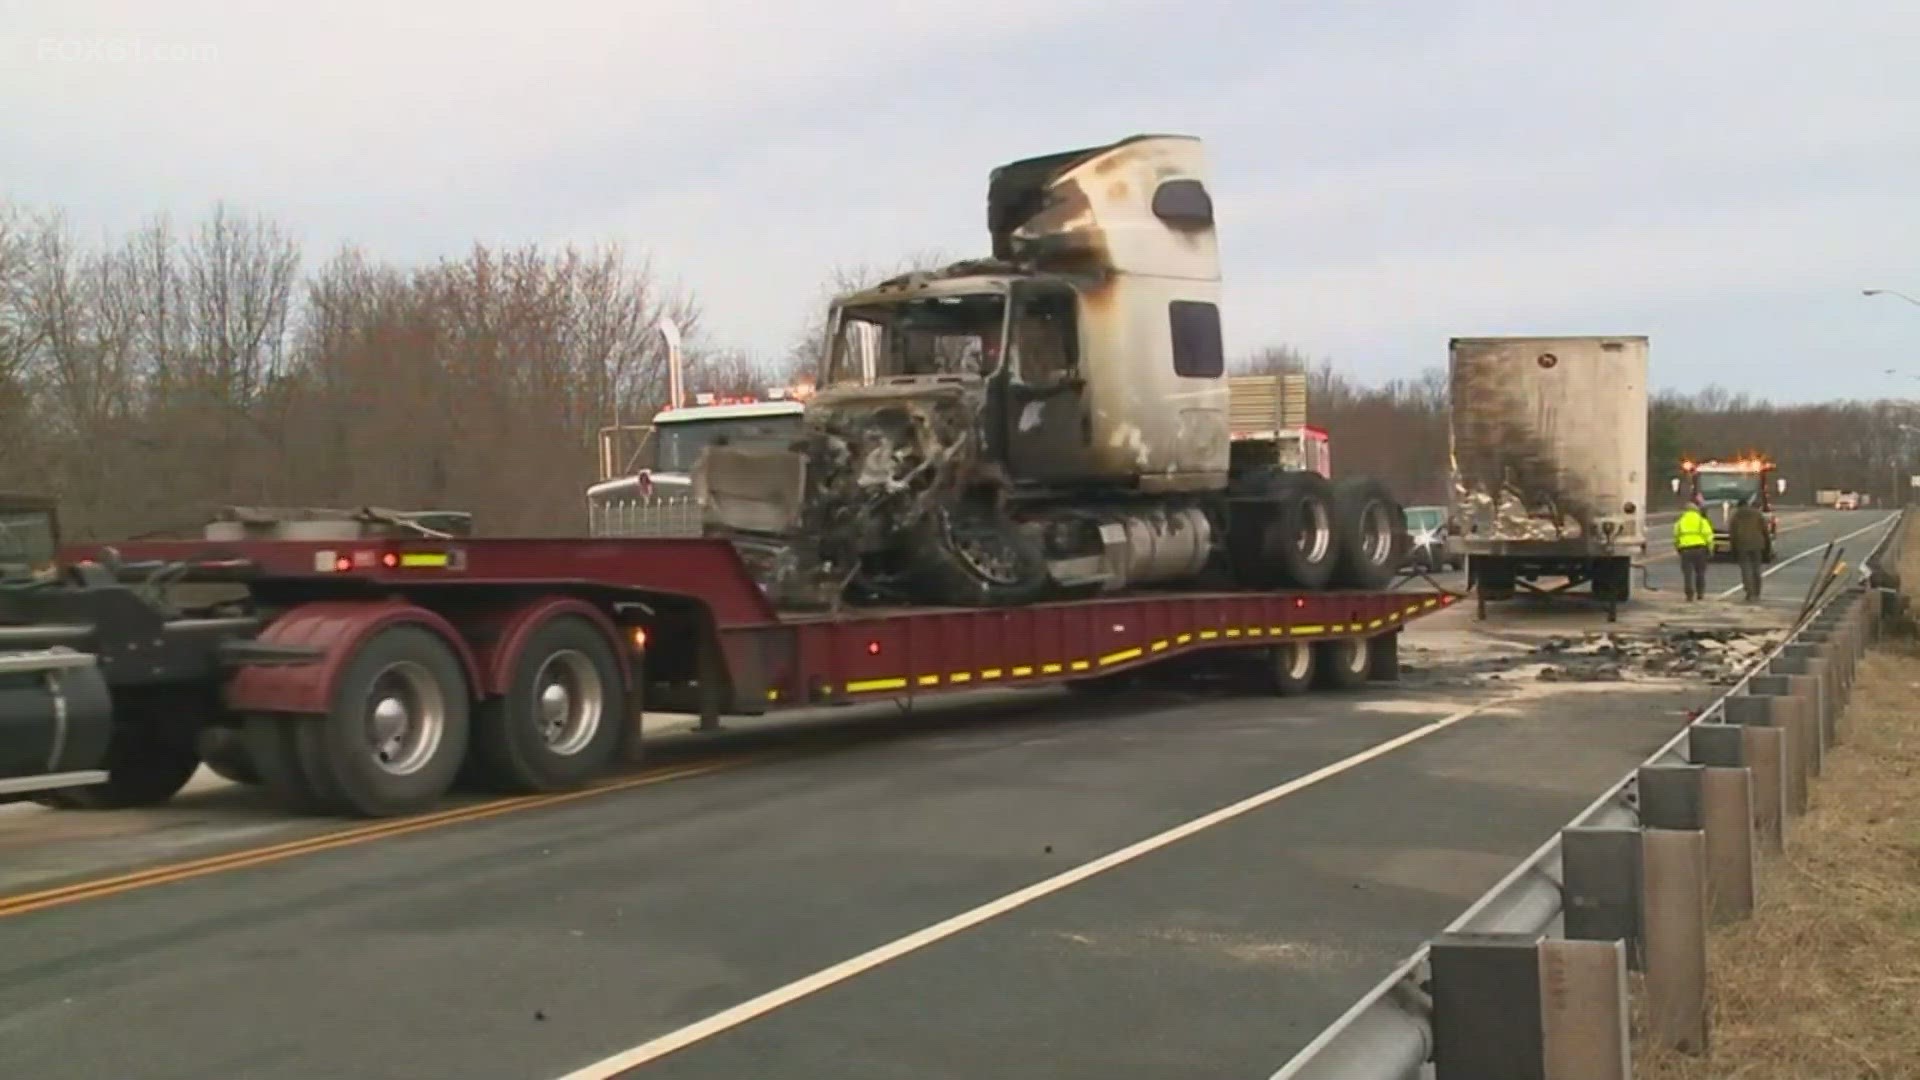 Injuries are reported after a tractor-trailer and van collided head-on in Suffield, police said Friday.